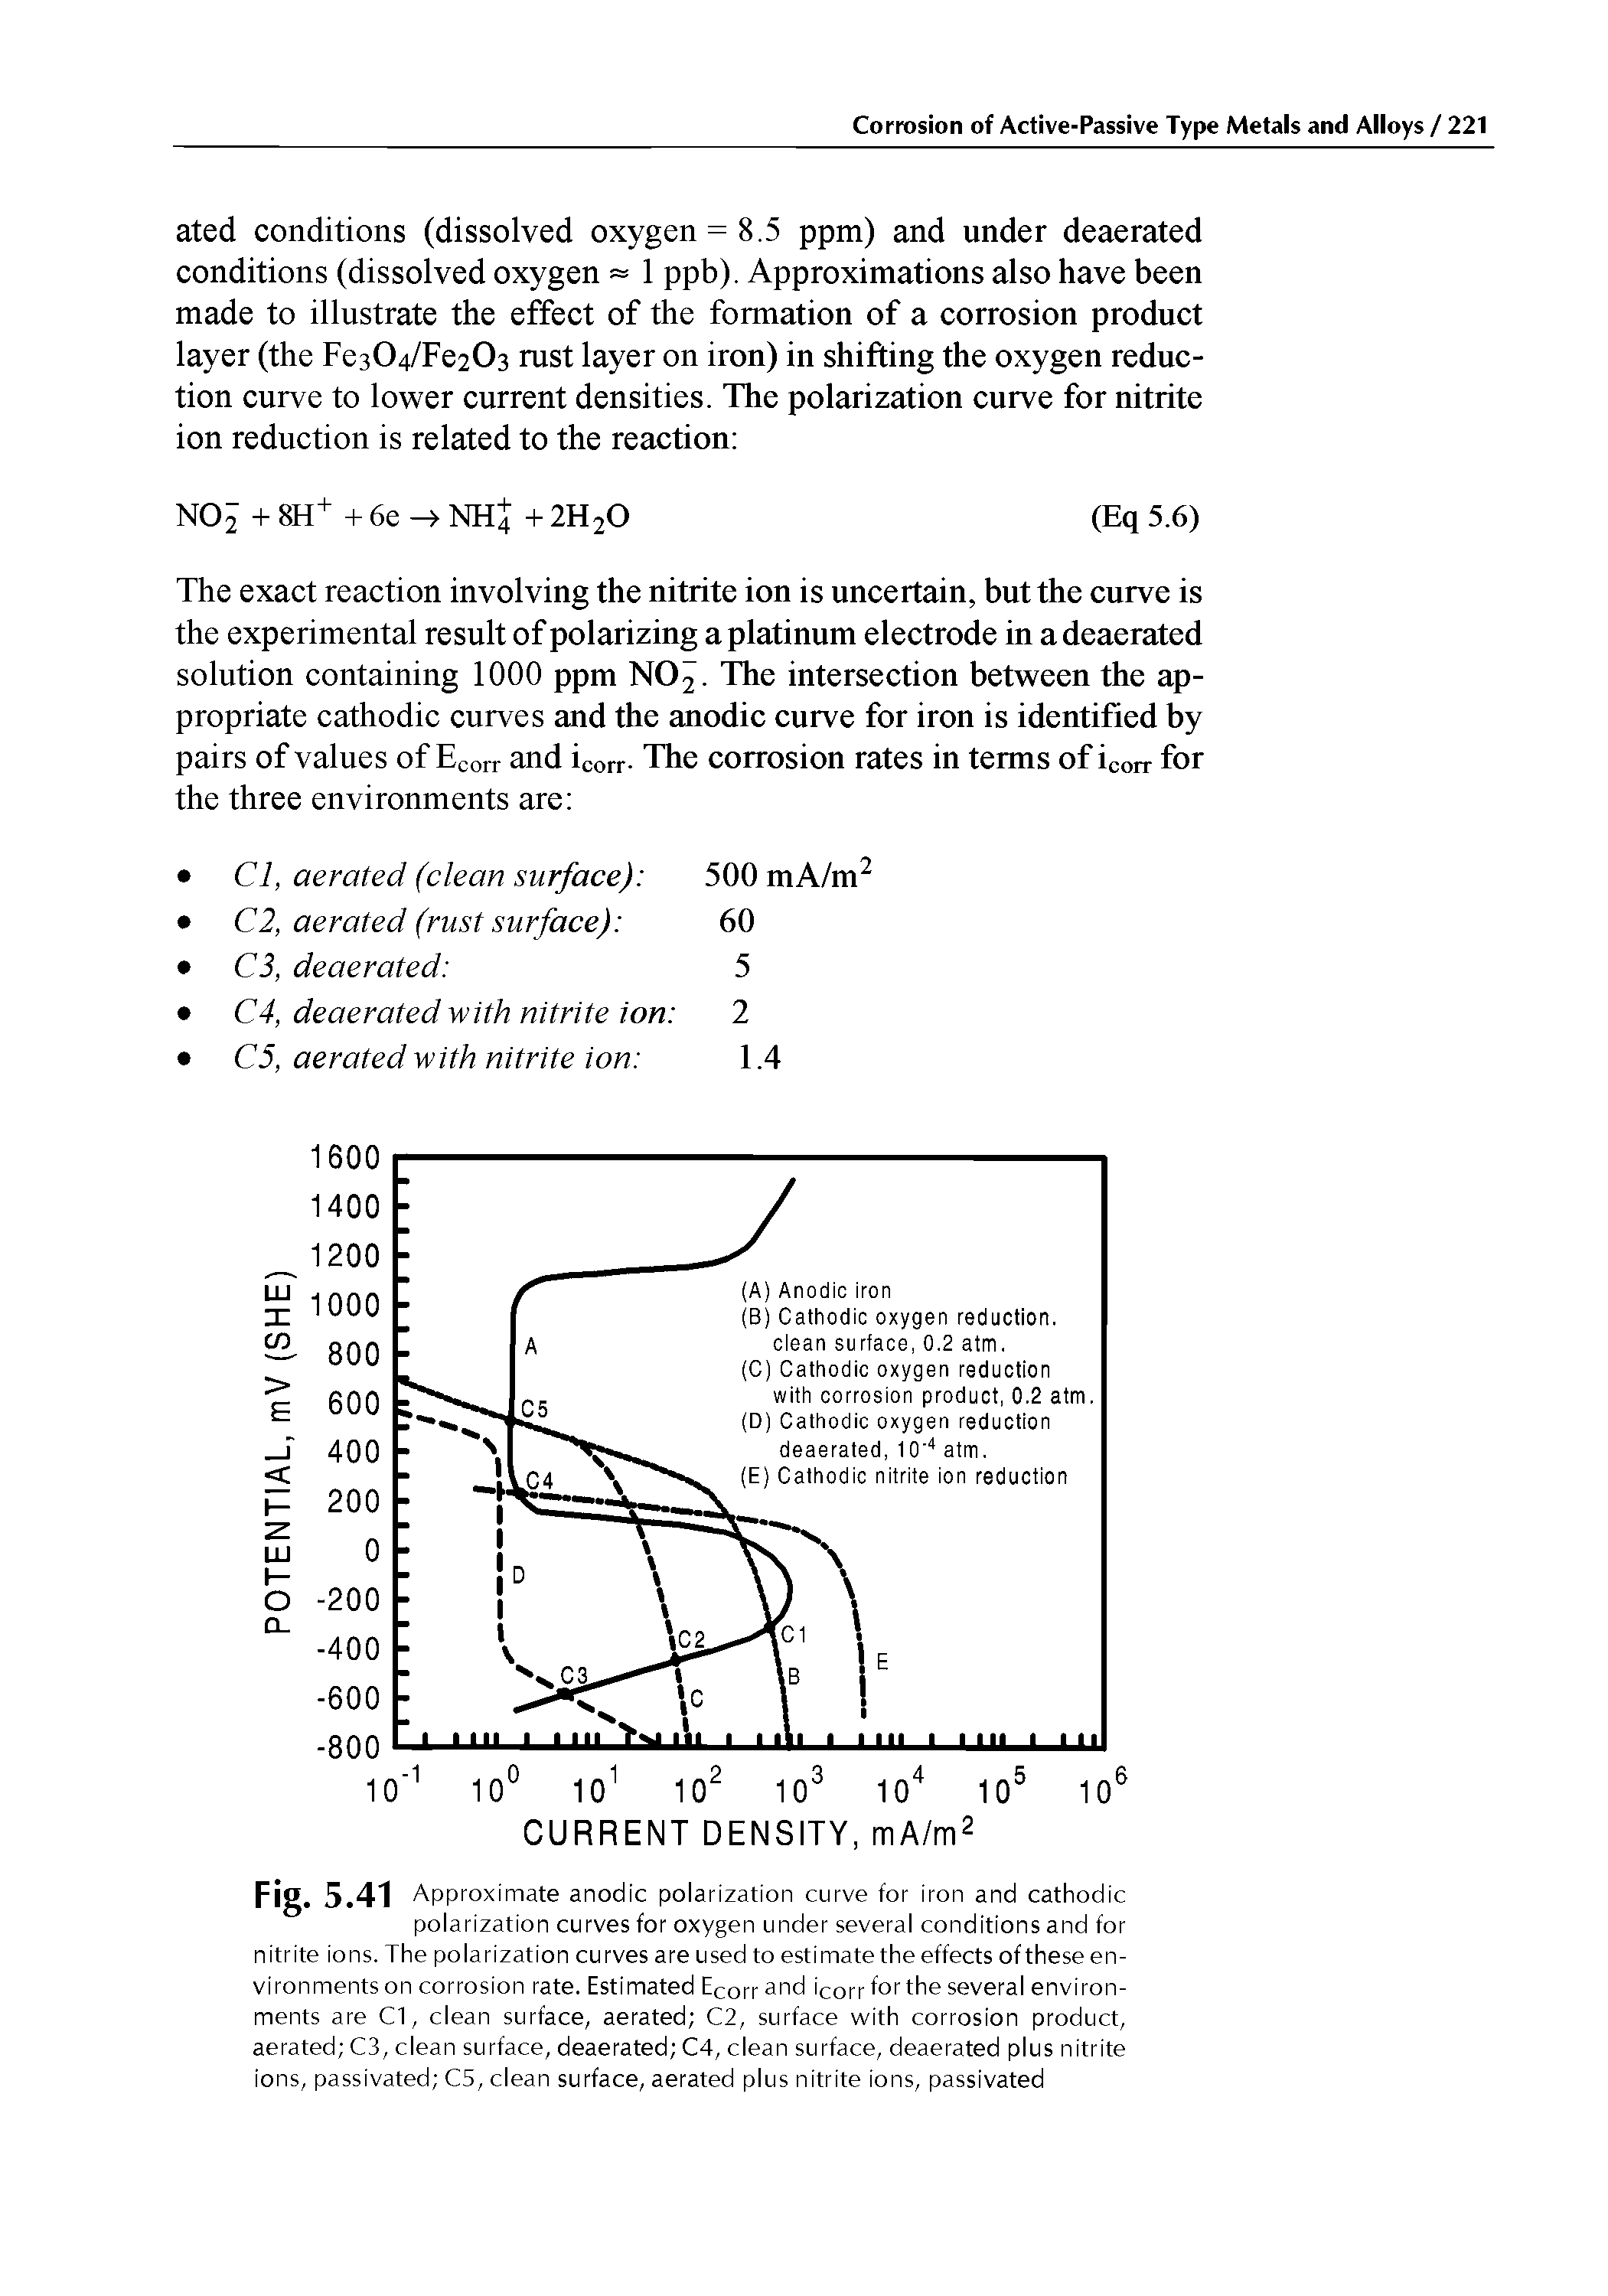 Fig. 5.41 Approximate anodic polarization curve for iron and cathodic polarization curves for oxygen under several conditions and for nitrite ions. The polarization curves are used to estimate the effects of these environments on corrosion rate. Estimated ECOrr ar d icorr for the several environments are C1, clean surface, aerated C2, surface with corrosion product, aerated C3, clean surface, deaerated C4, clean surface, deaerated plus nitrite ions, passivated C5, clean surface, aerated plus nitrite ions, passivated...